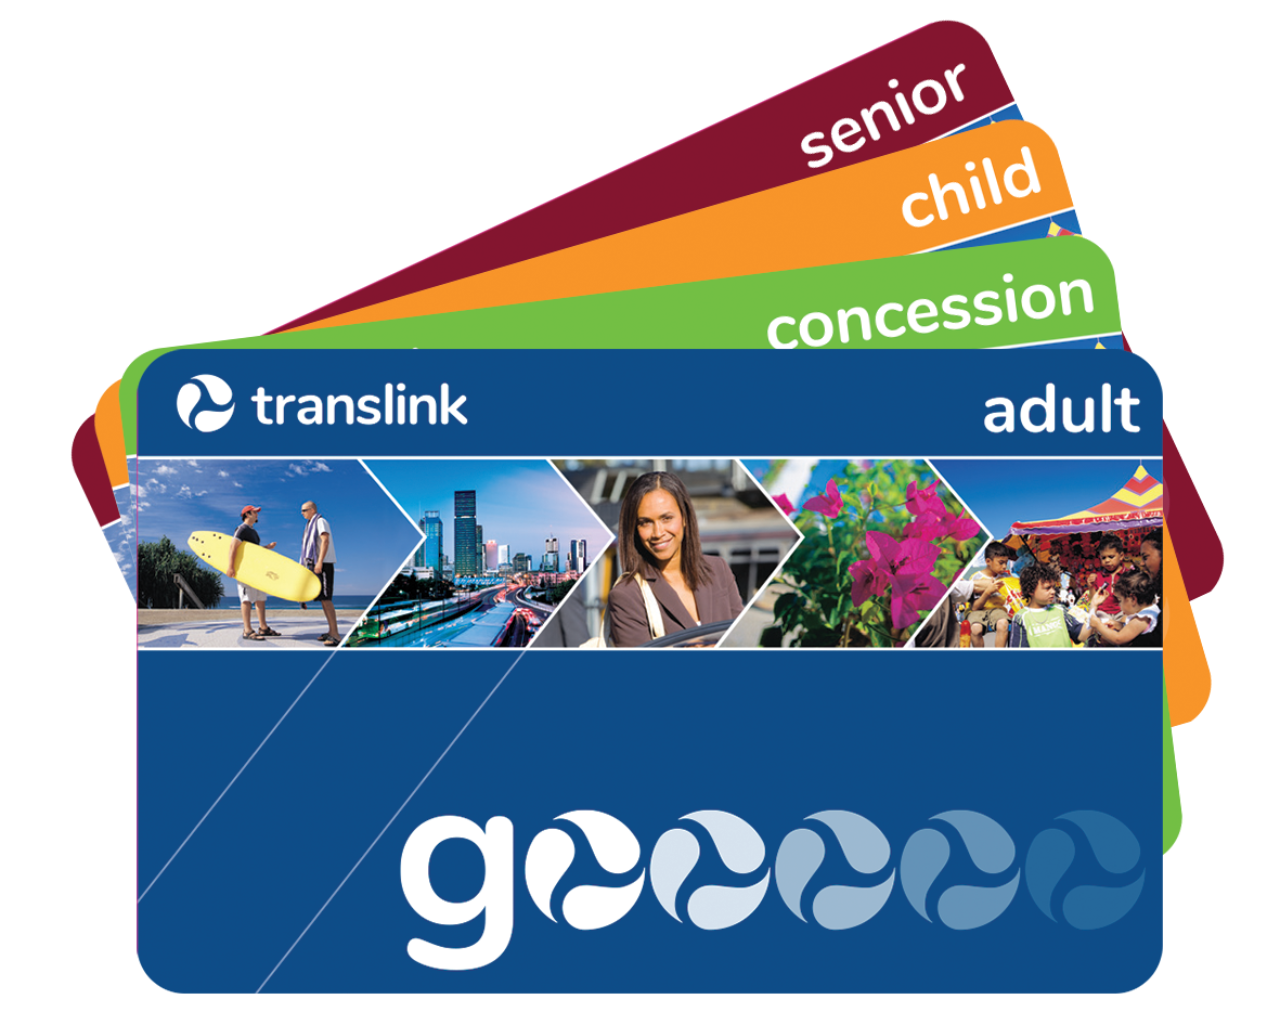 Fan showing four go cards - Blue adult go card at front, green concession, orange child, and maroon senior go card